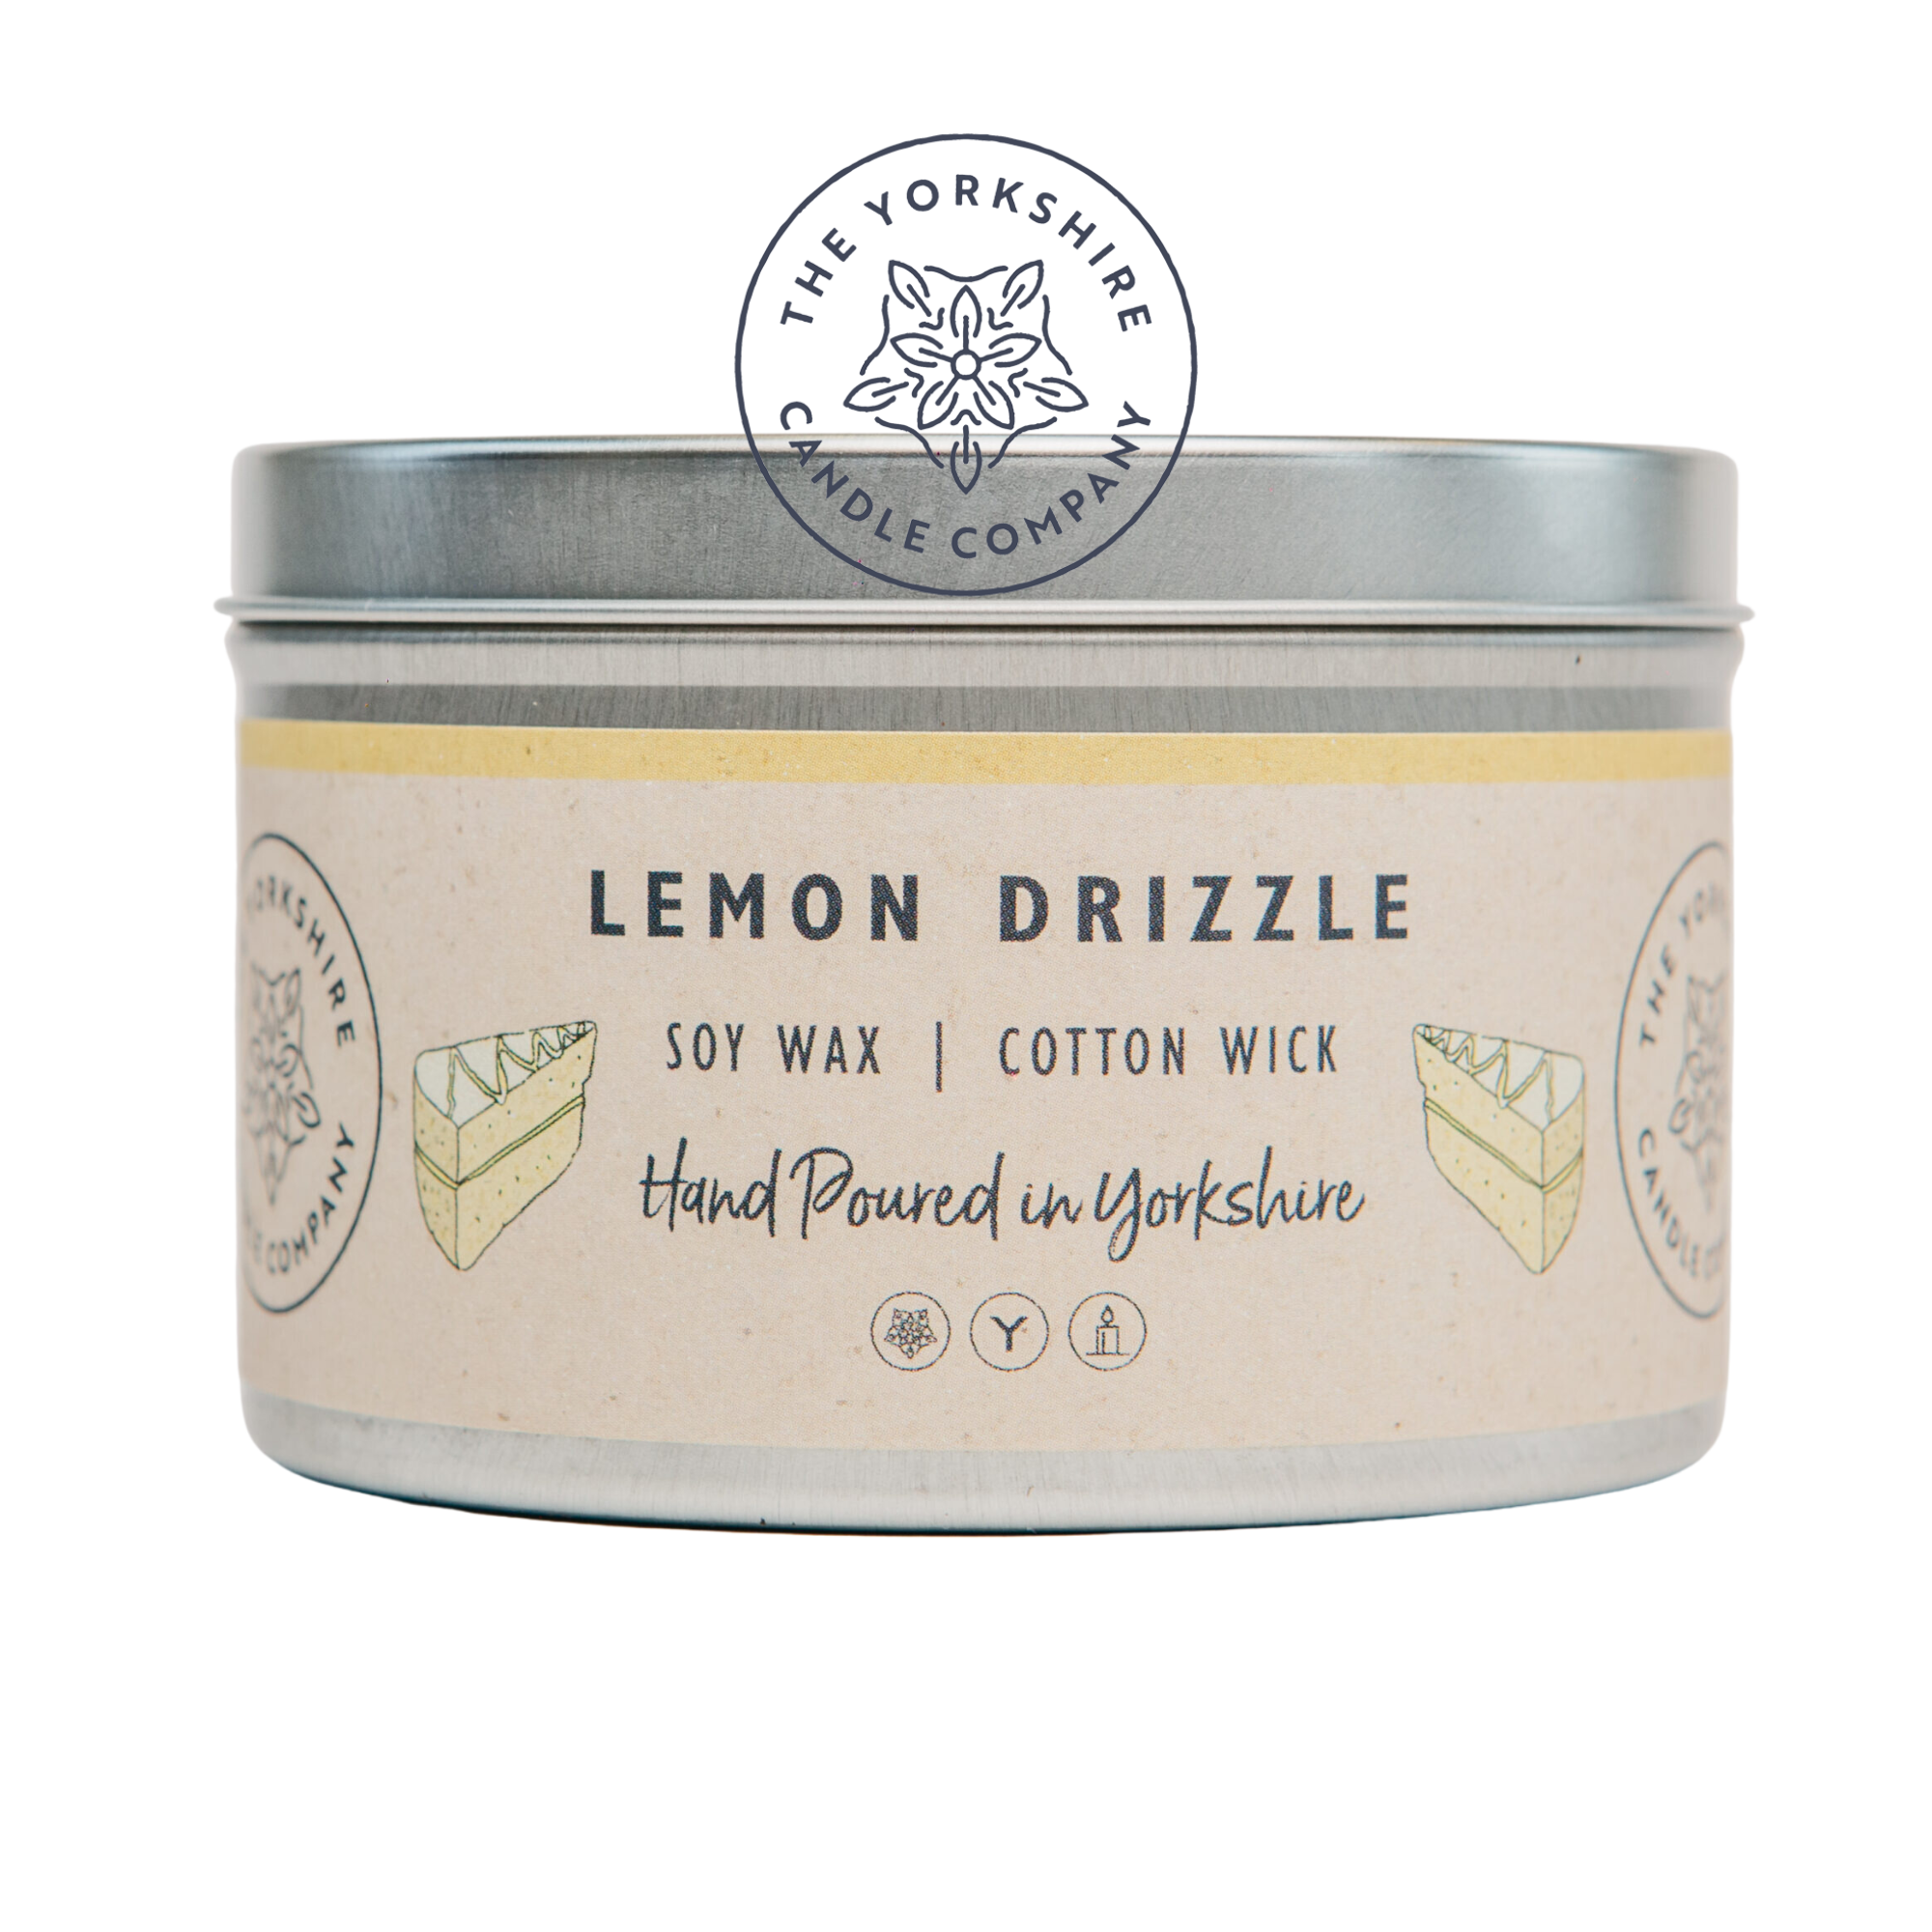 Lemon Drizzle - Soy Wax Cotton Wick Hand Poured Candle by The Yorkshire Candle Company